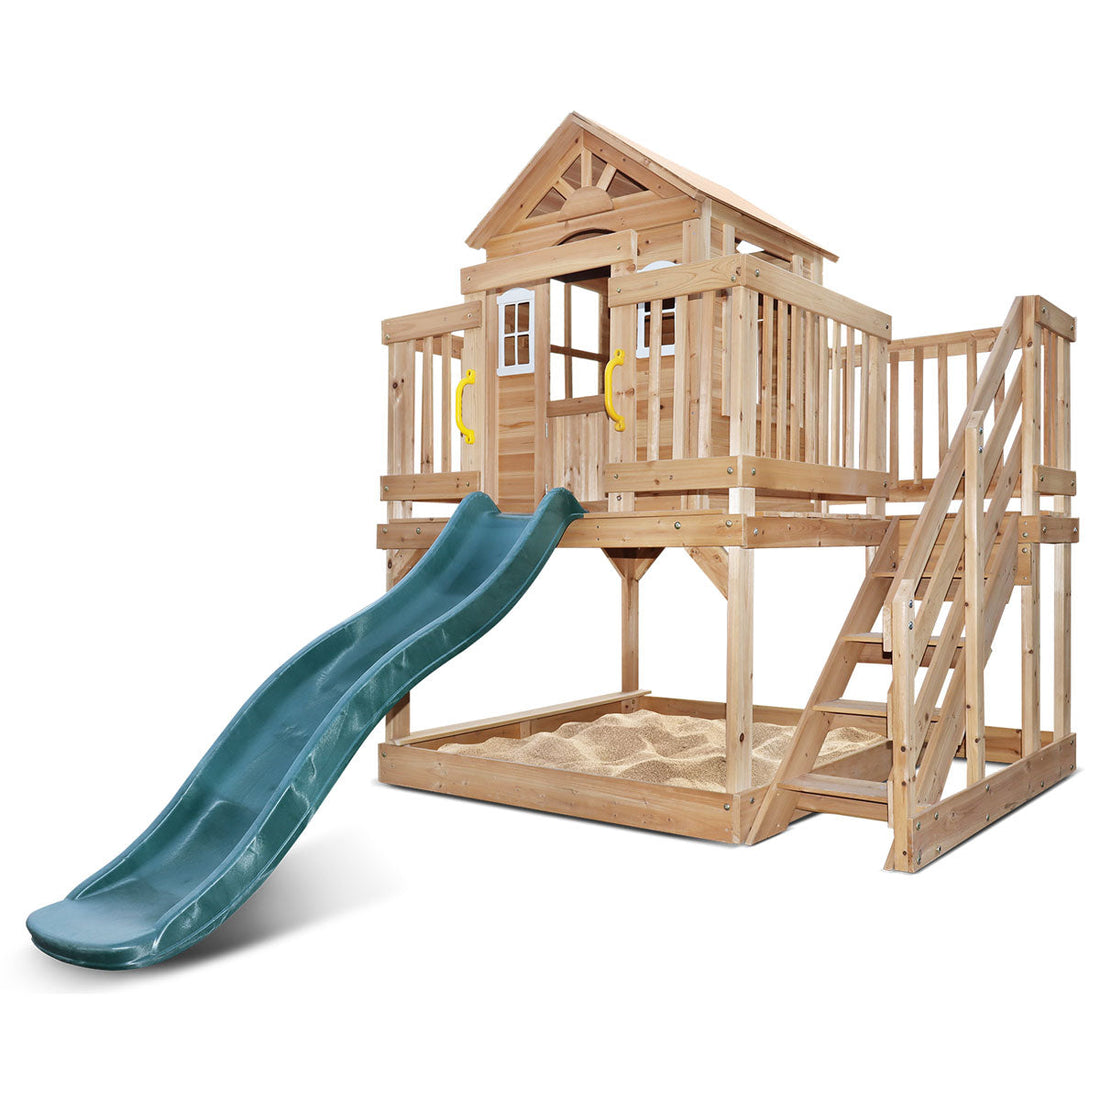 Lifespan Kids Silverton Play Centre With 1.8m Slide-Swing Sets-PEROZ Accessories